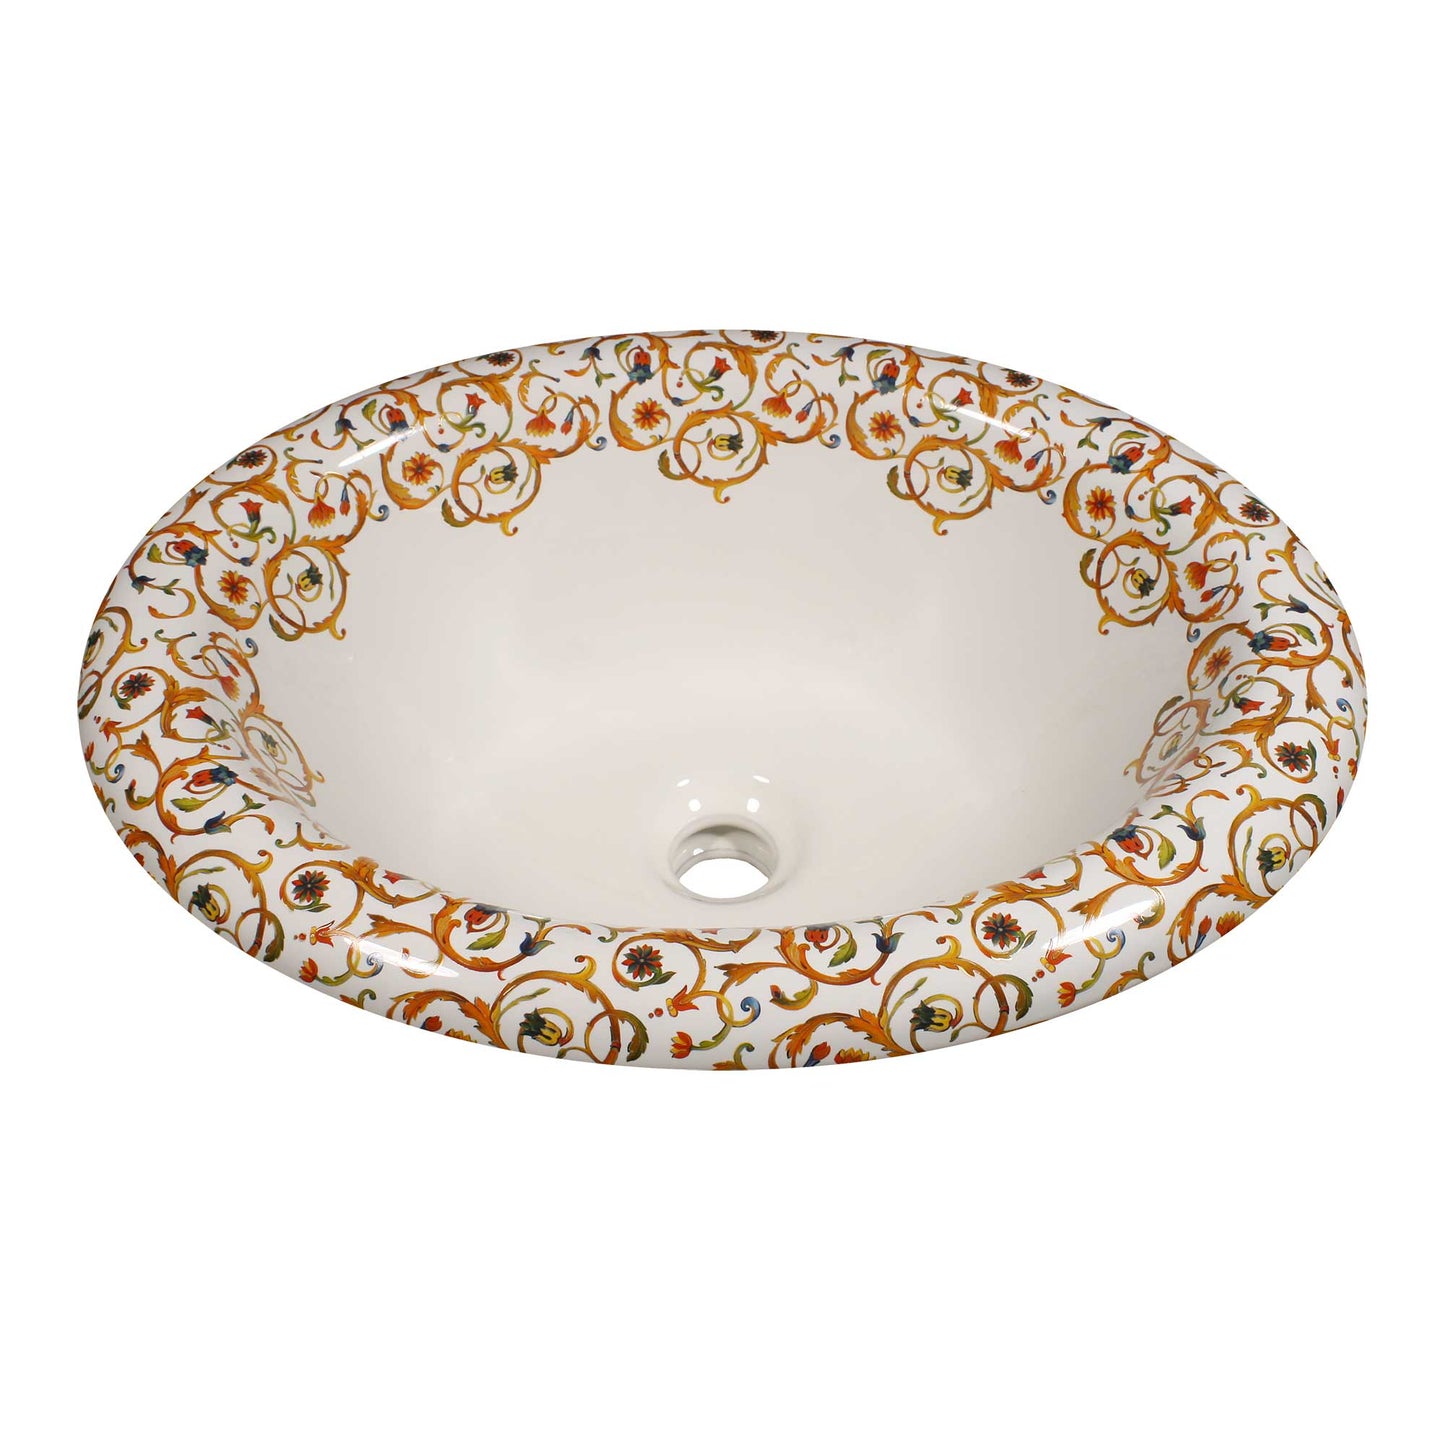 Classic Florentine design in gold, red and blue painted on an oval drop-in bathroom sink for a new twist on this old classic design.